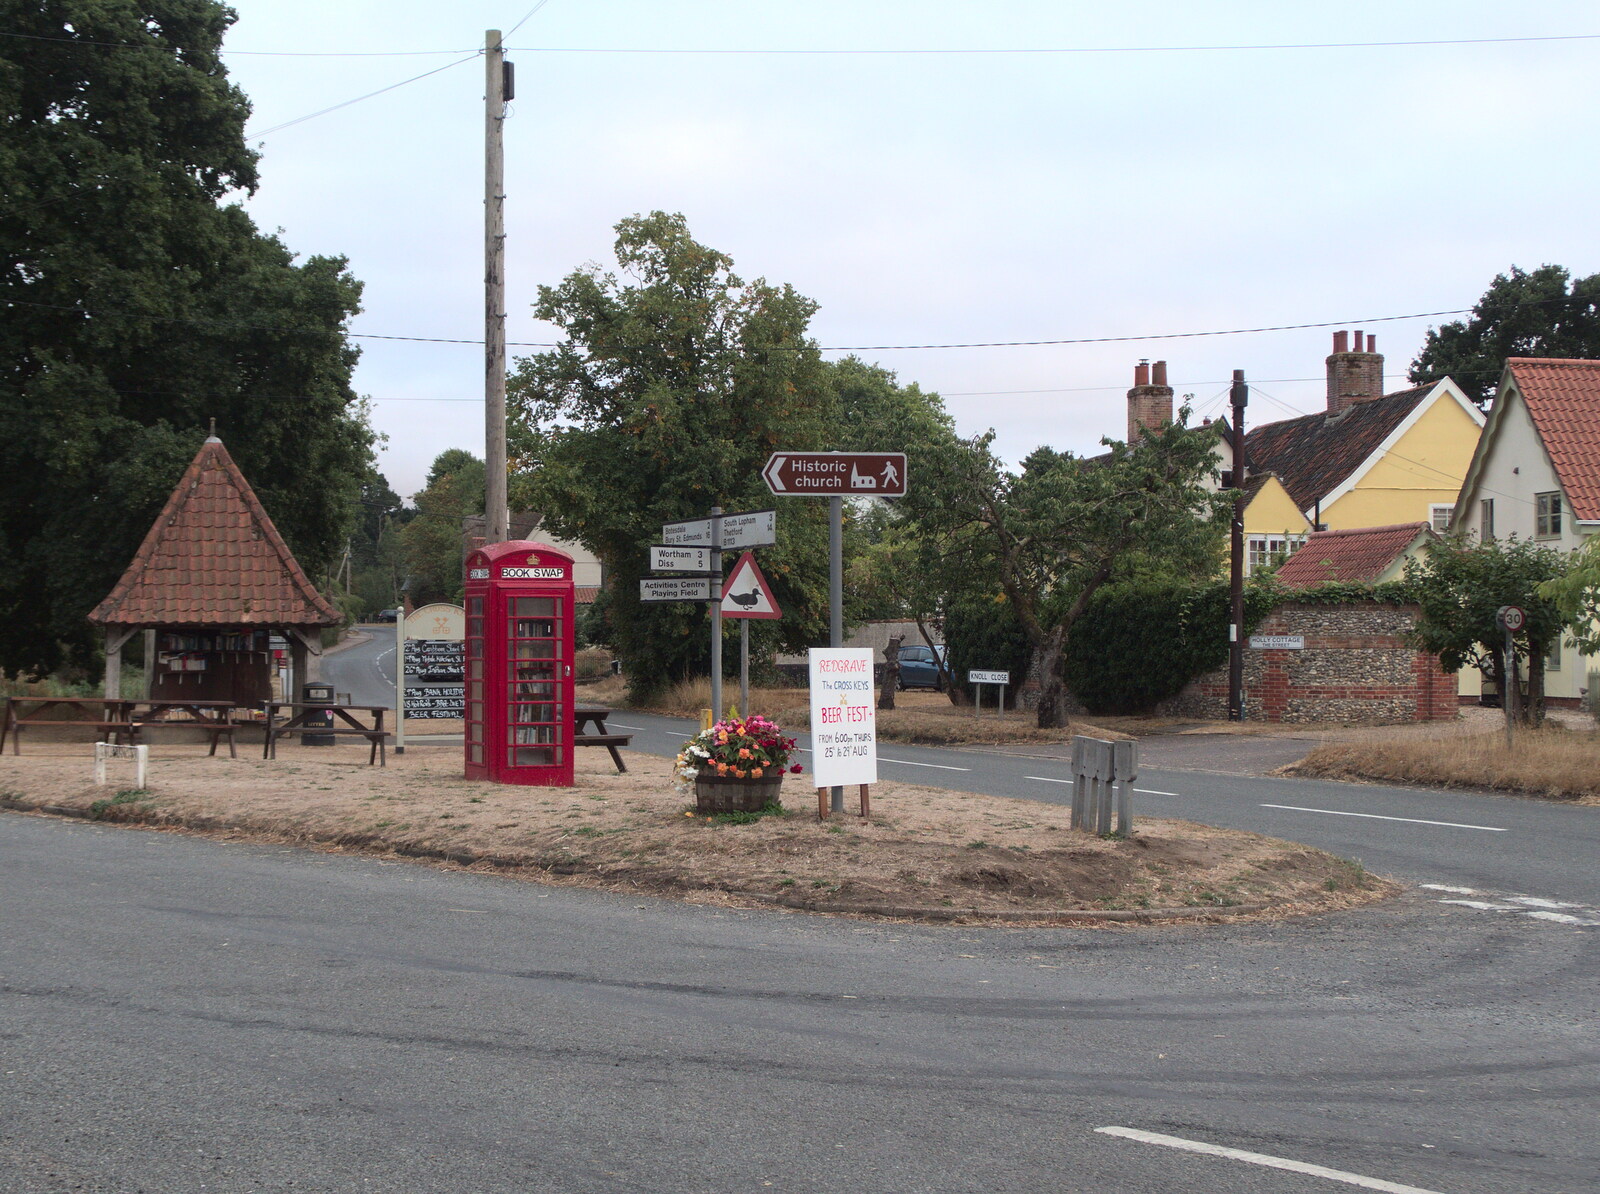 The BSCC at the Cross Keys, Redgrave, Suffolk - 25th August 2022: A red K6 phonebox on the green at Redgrave